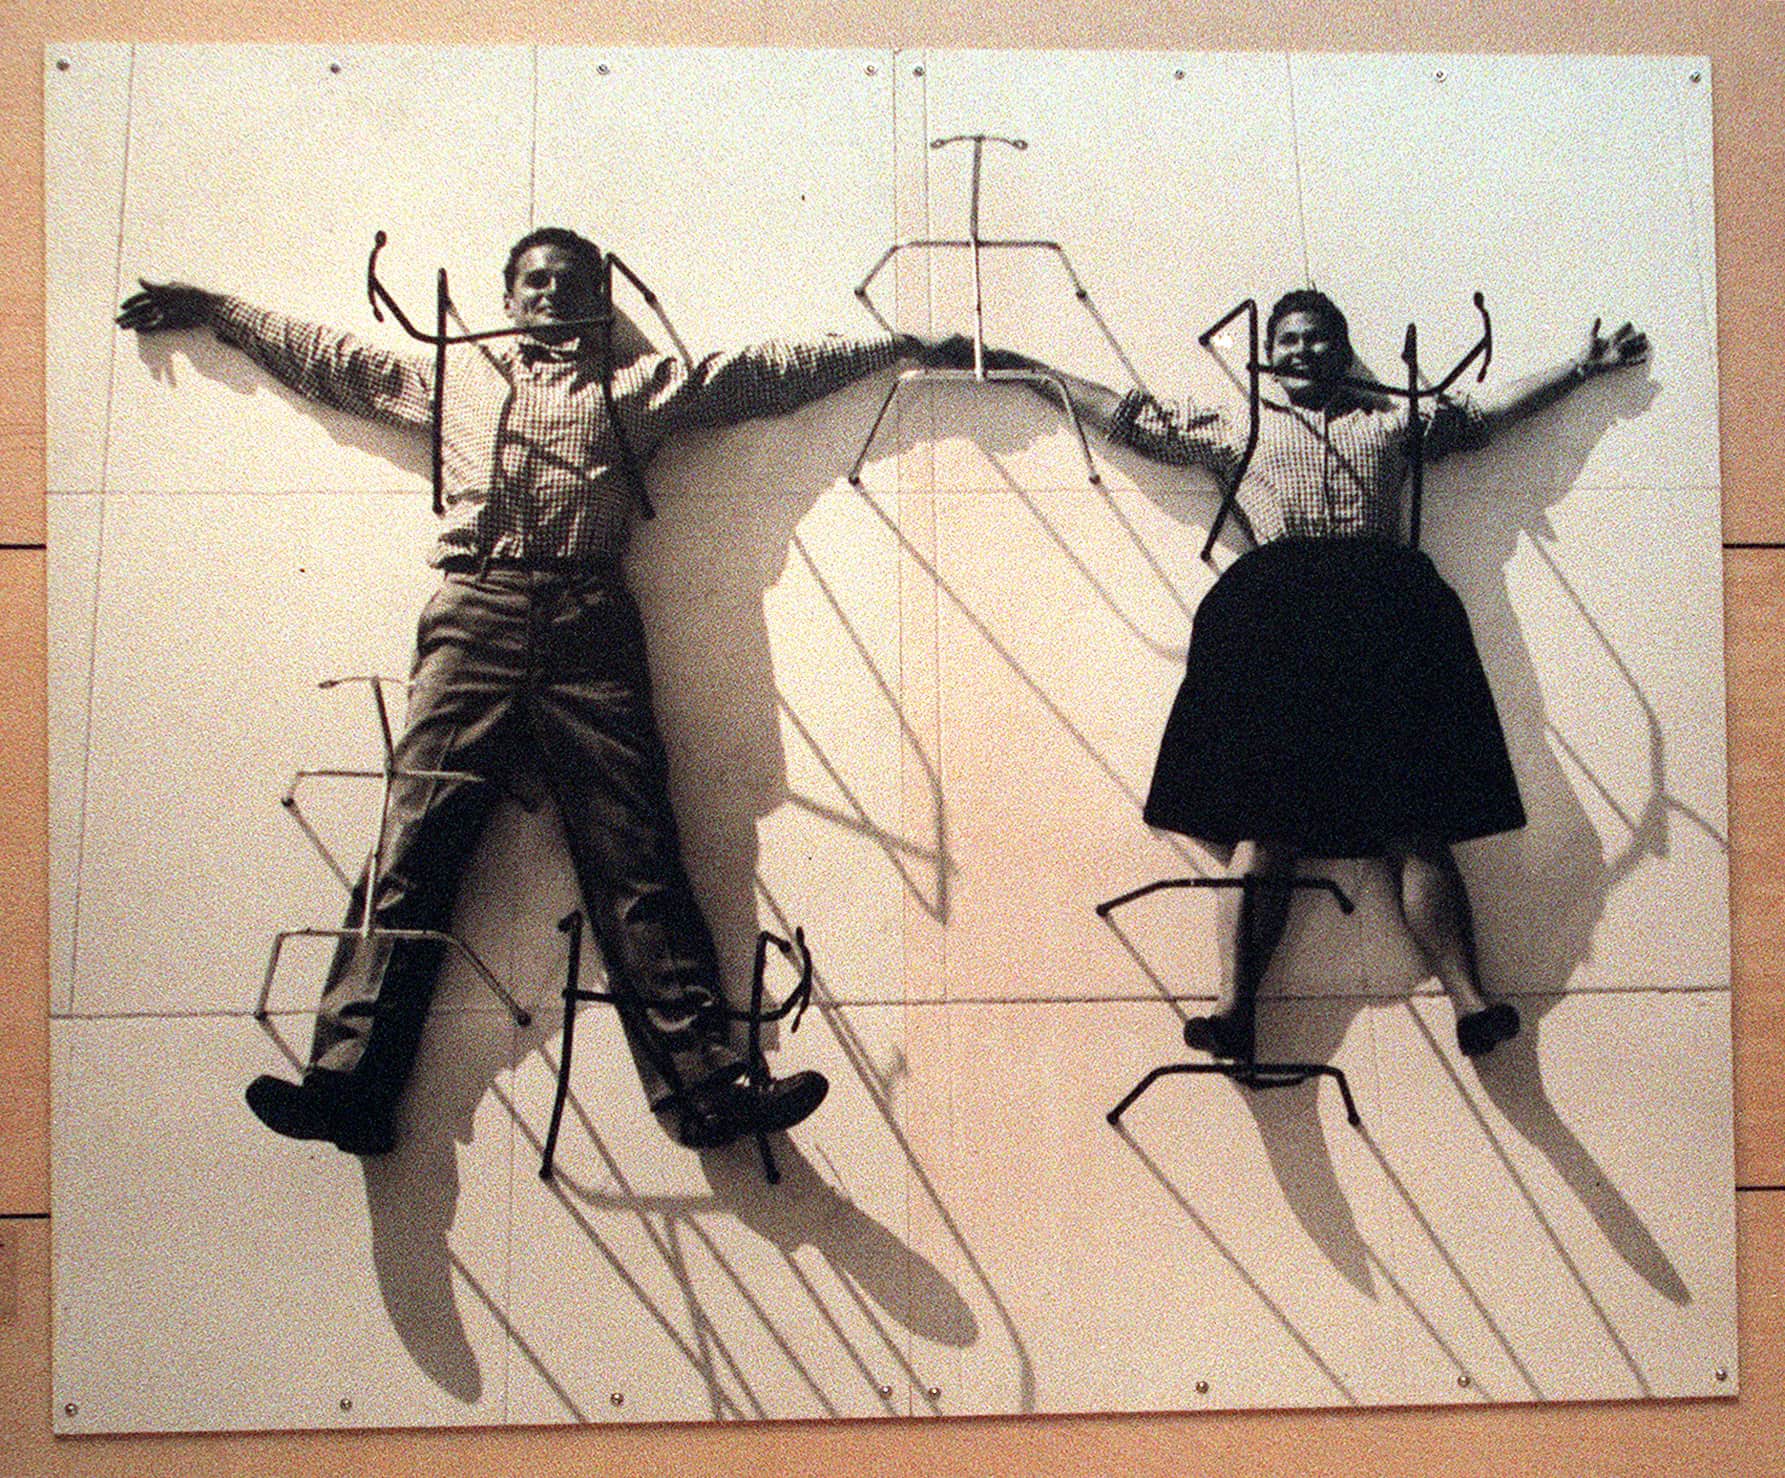 Photo mural of Charles and Ray Eames on exhibit at LACMA